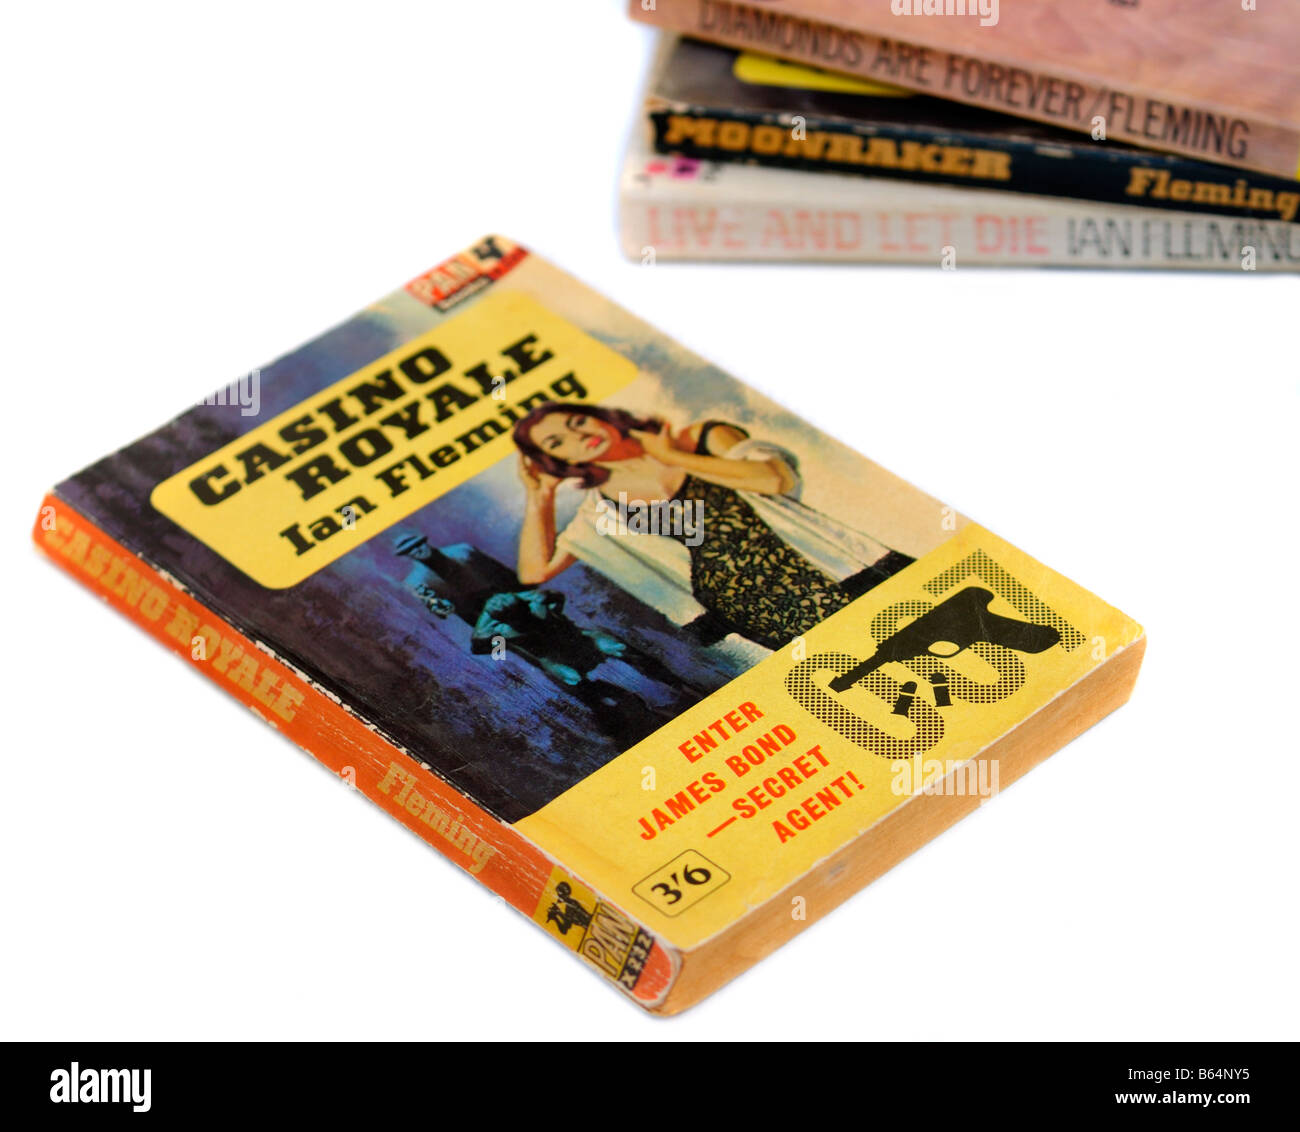 James Bond Casino Royale Live and Let Die Moonraker and Diamonds are Forever paperbacks by Ian Fleming Stock Photo